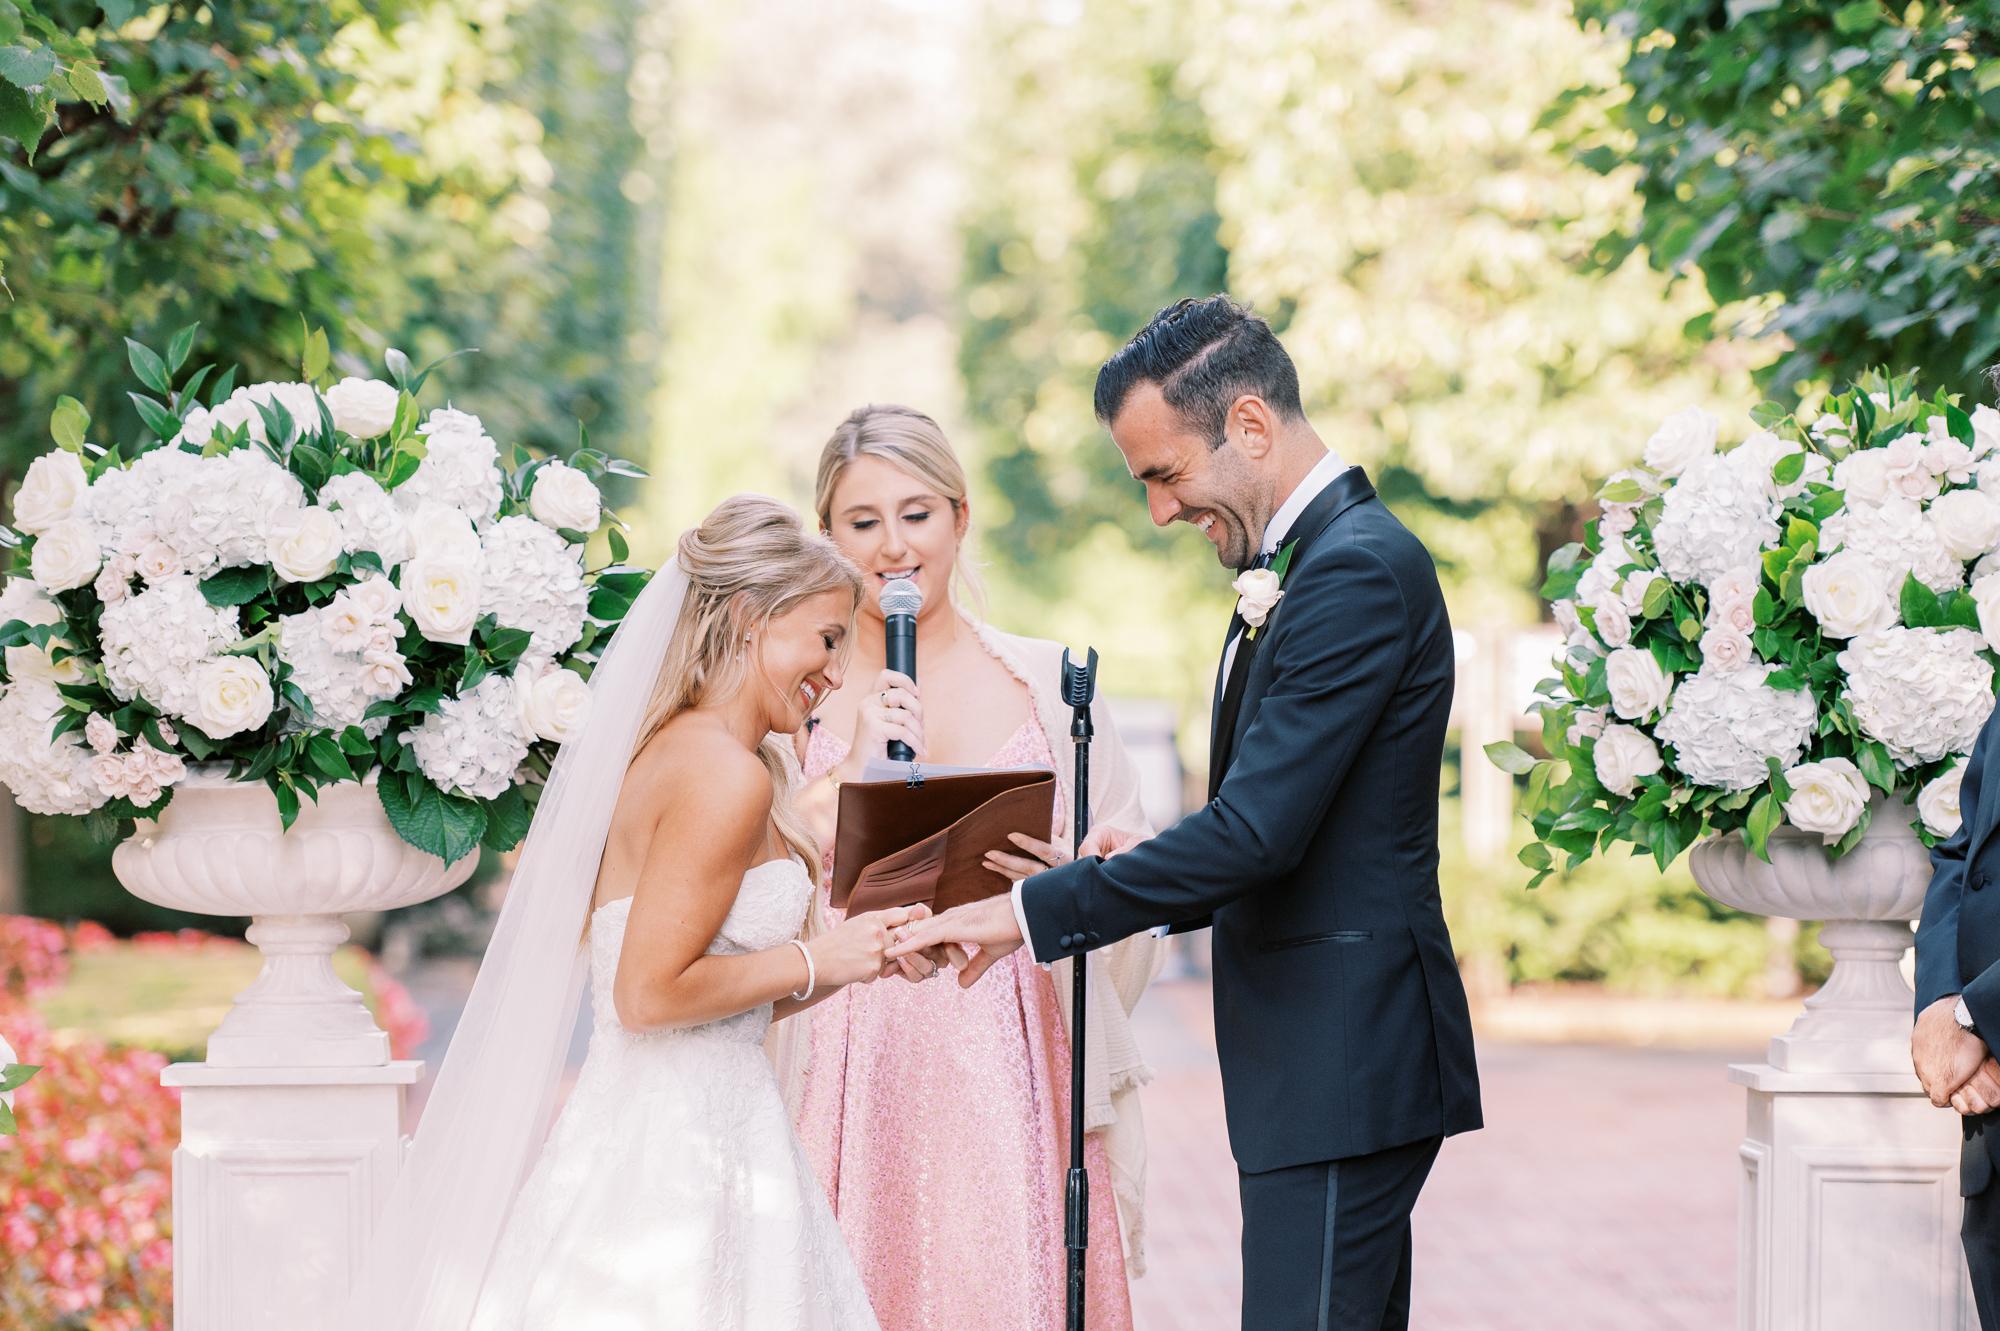 A Classic Chicago Garden Wedding Filled With Elegance At Every Turn